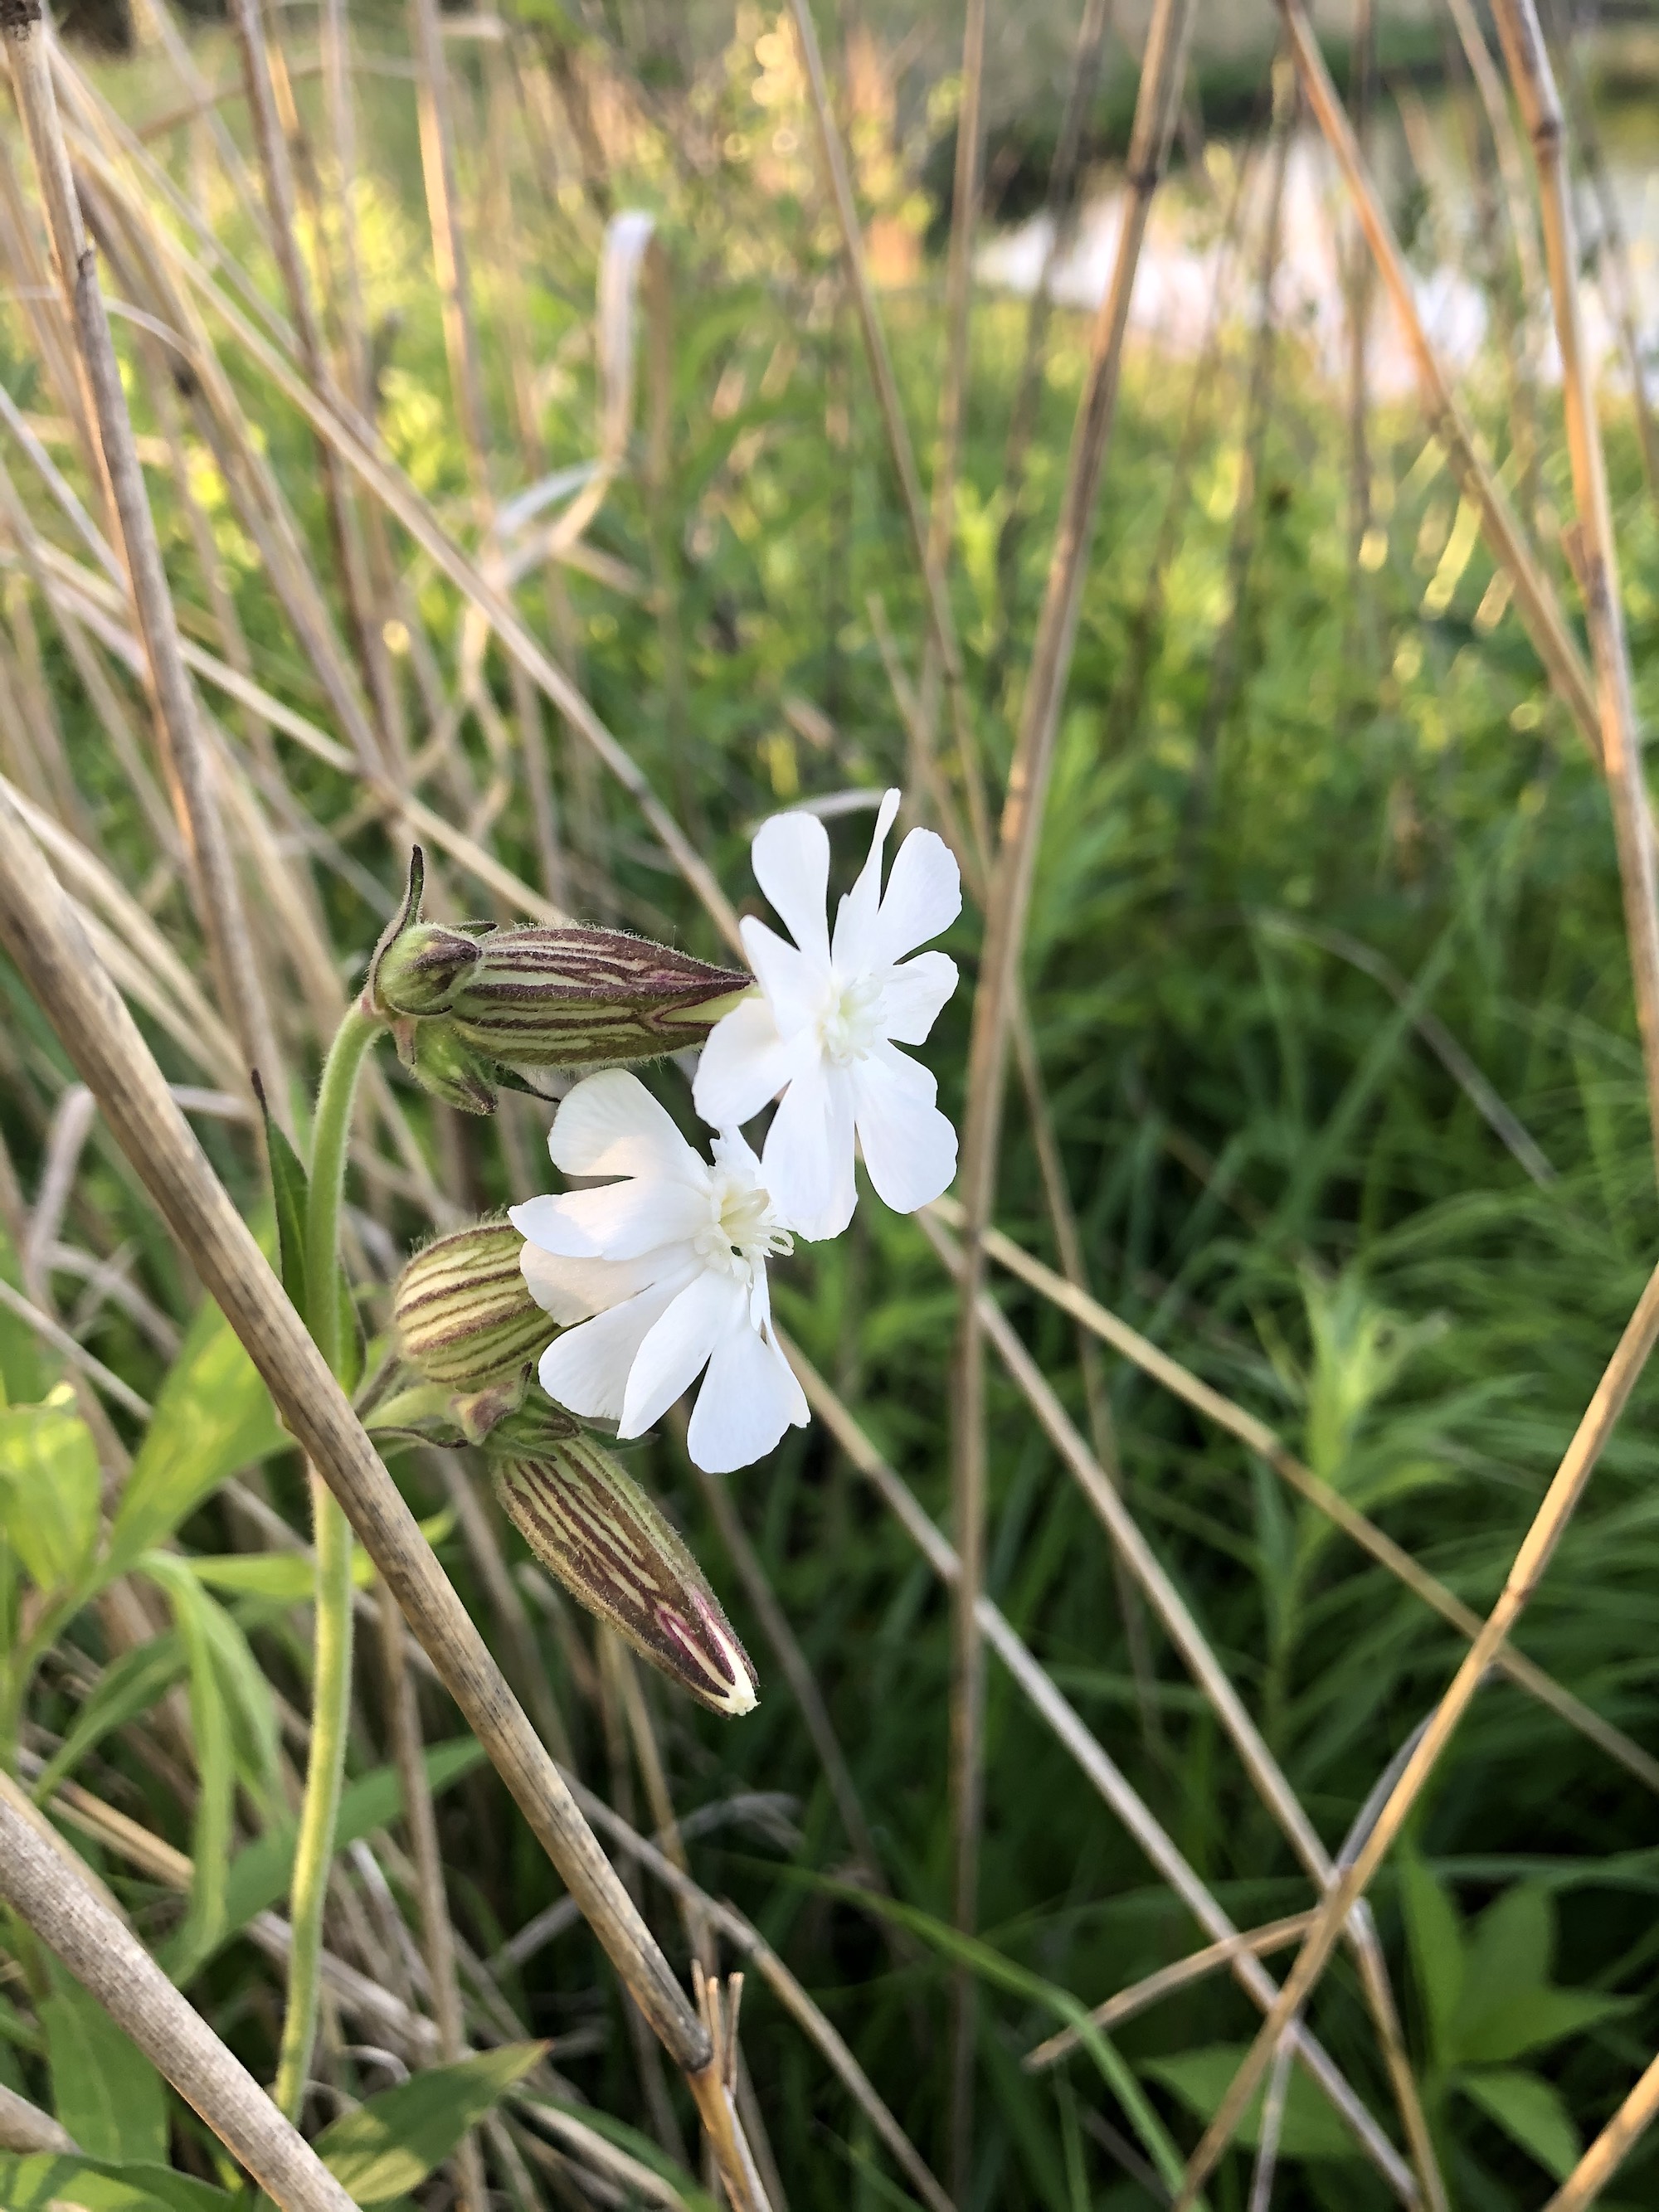 Campion blooming on the bank of the retaining pond on June 2, 2020.